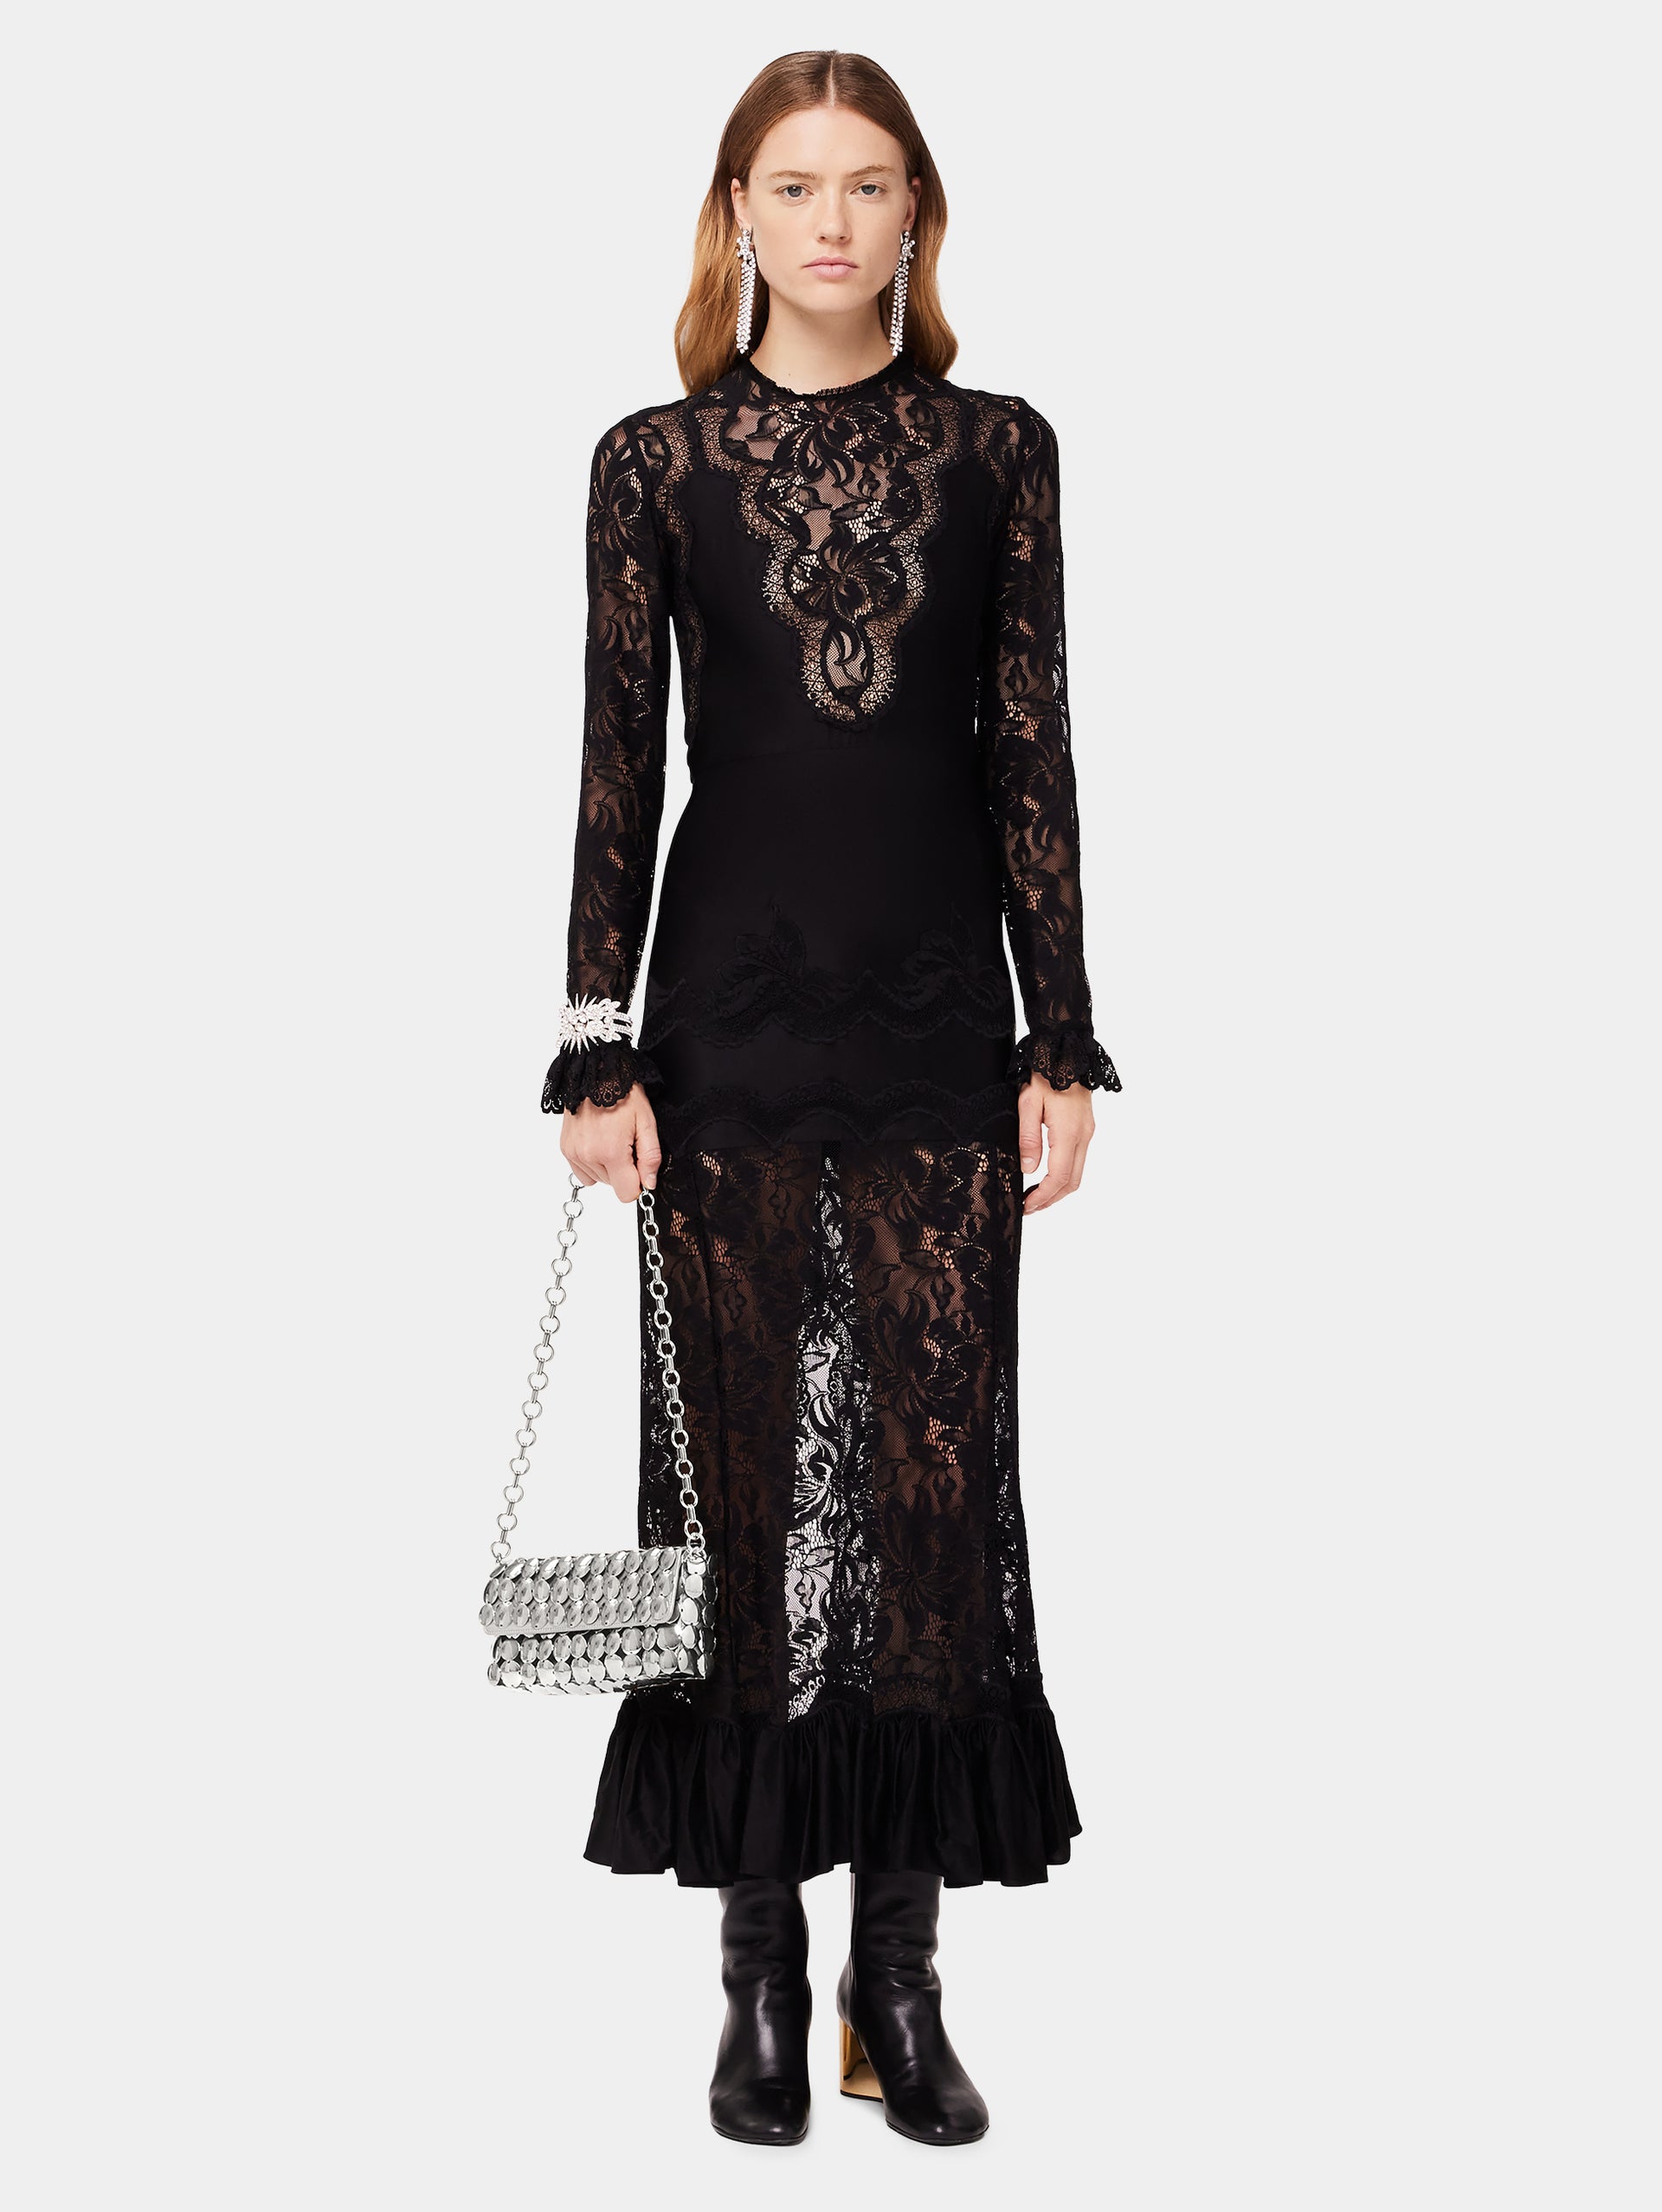 Black Paisley Dress by Rabanne for $95